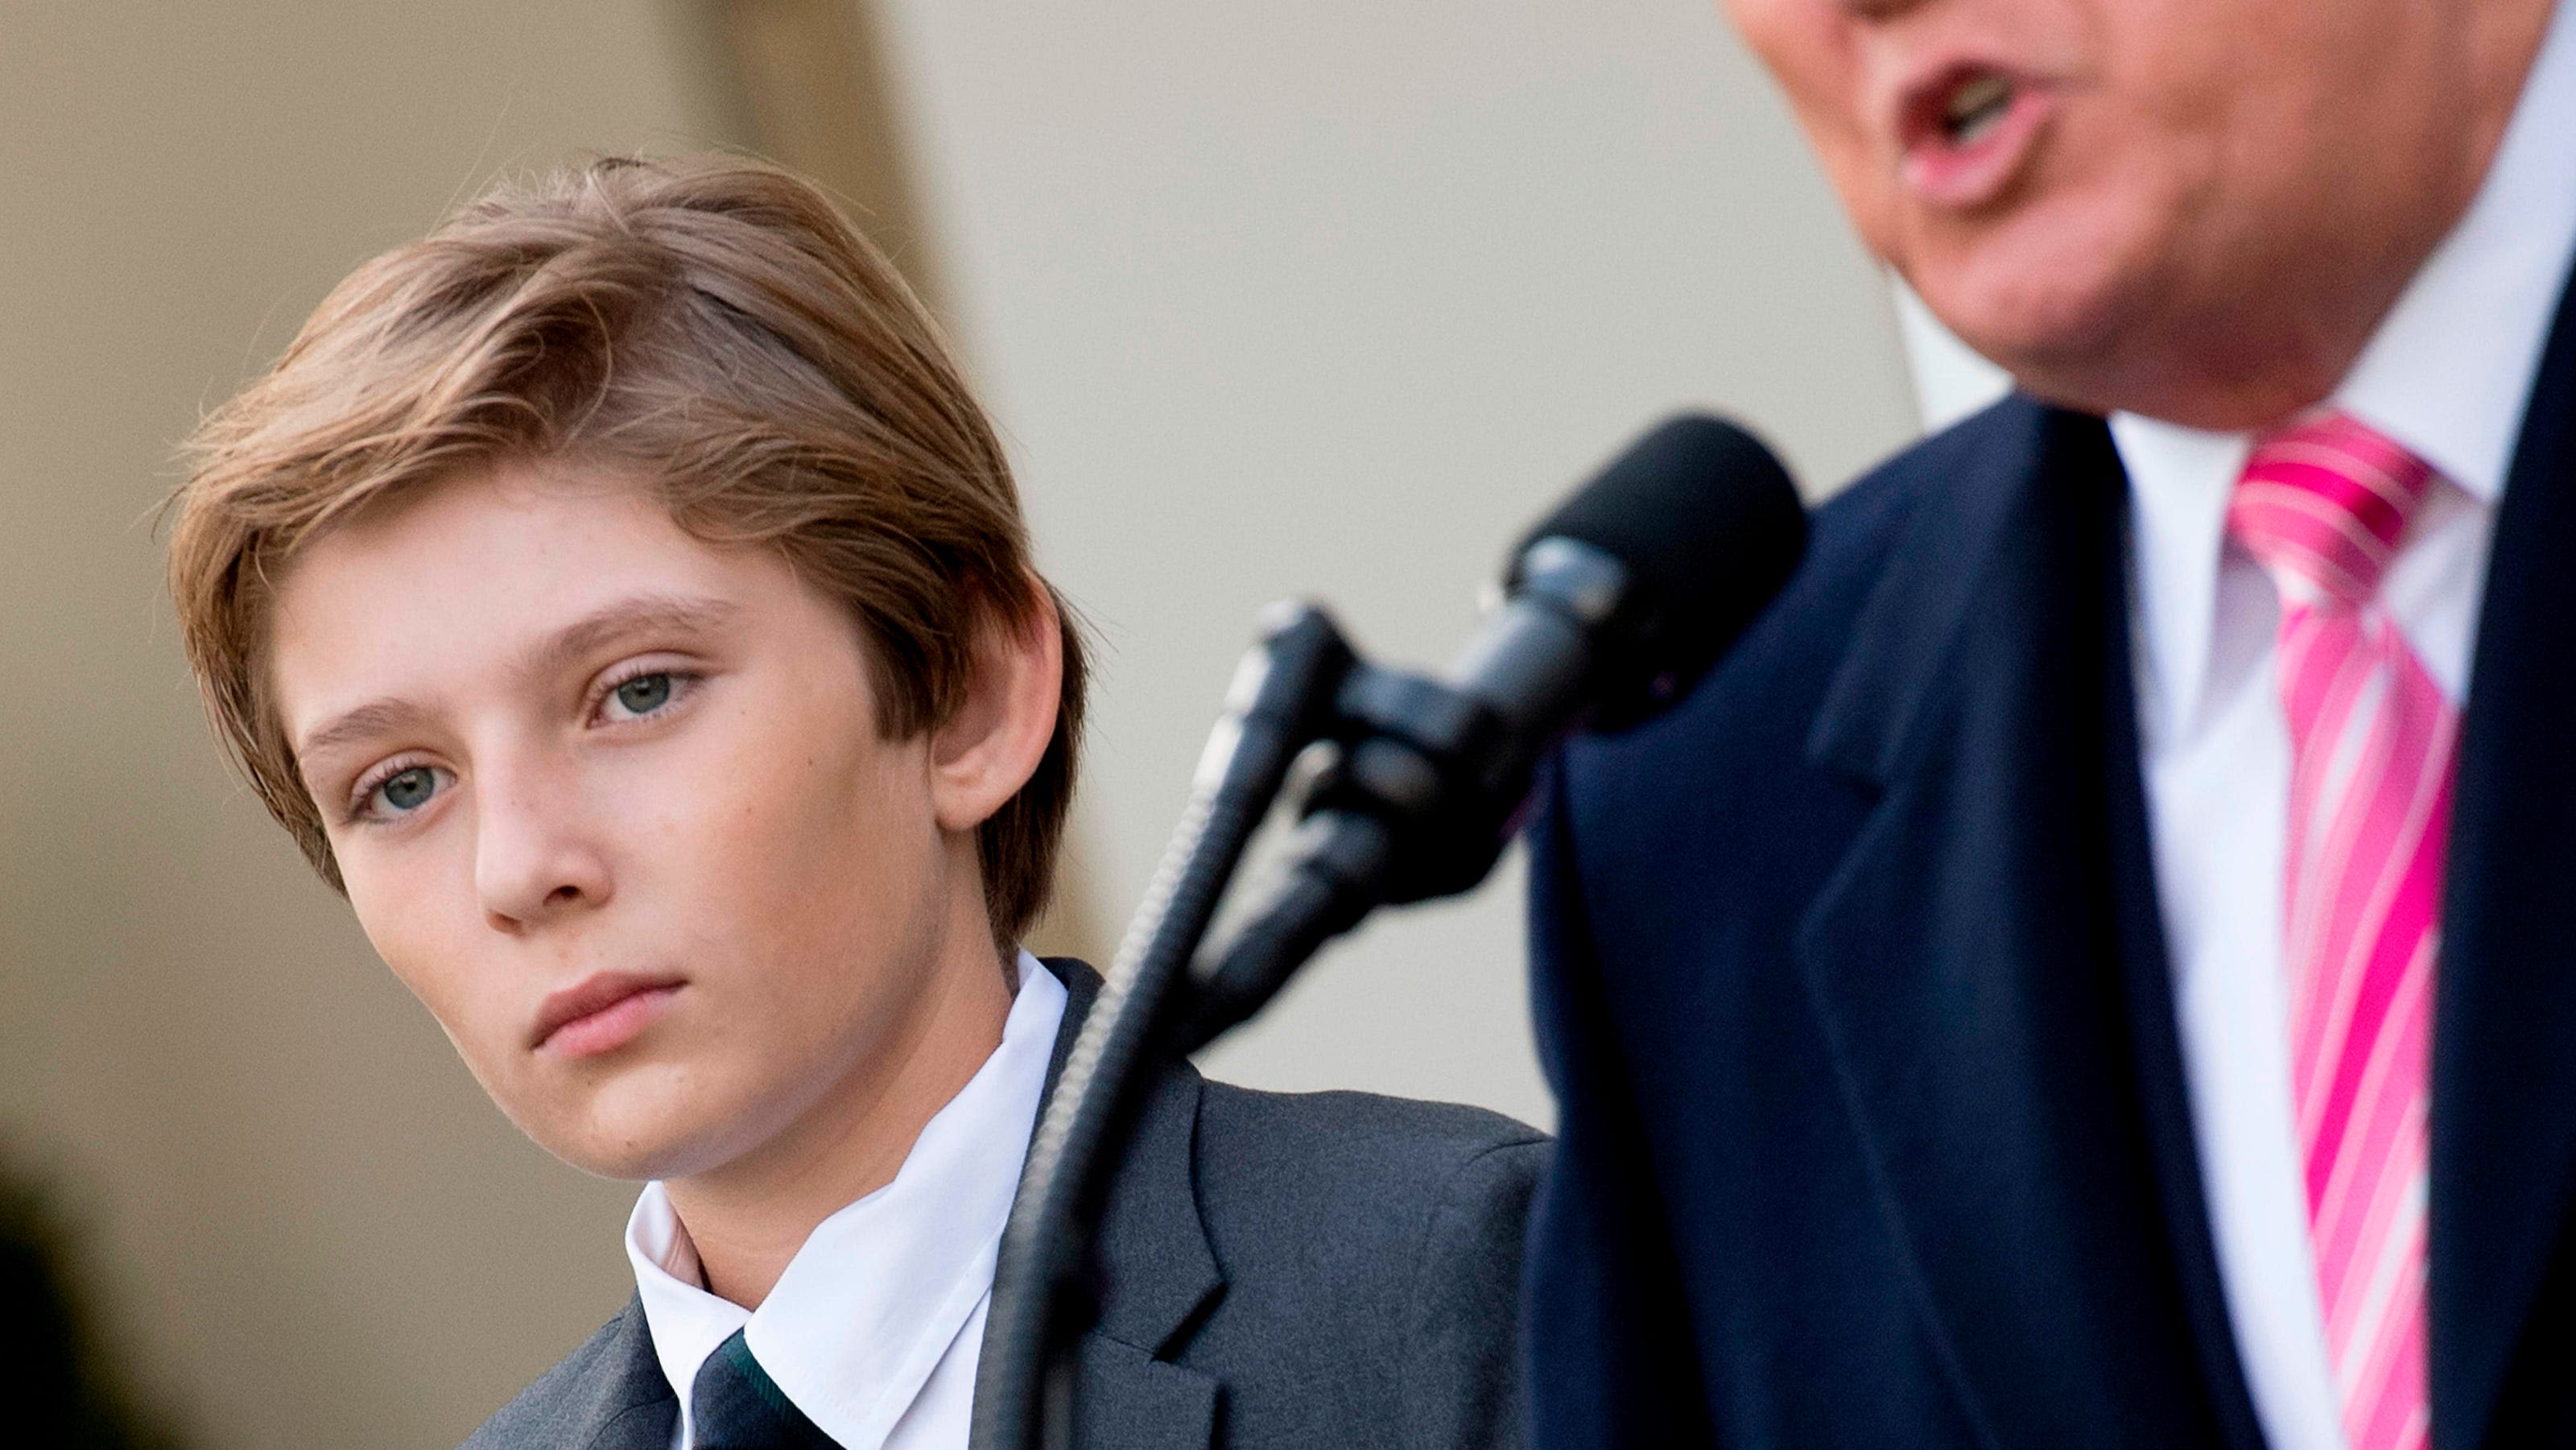 Where is Barron Trump now? What we know